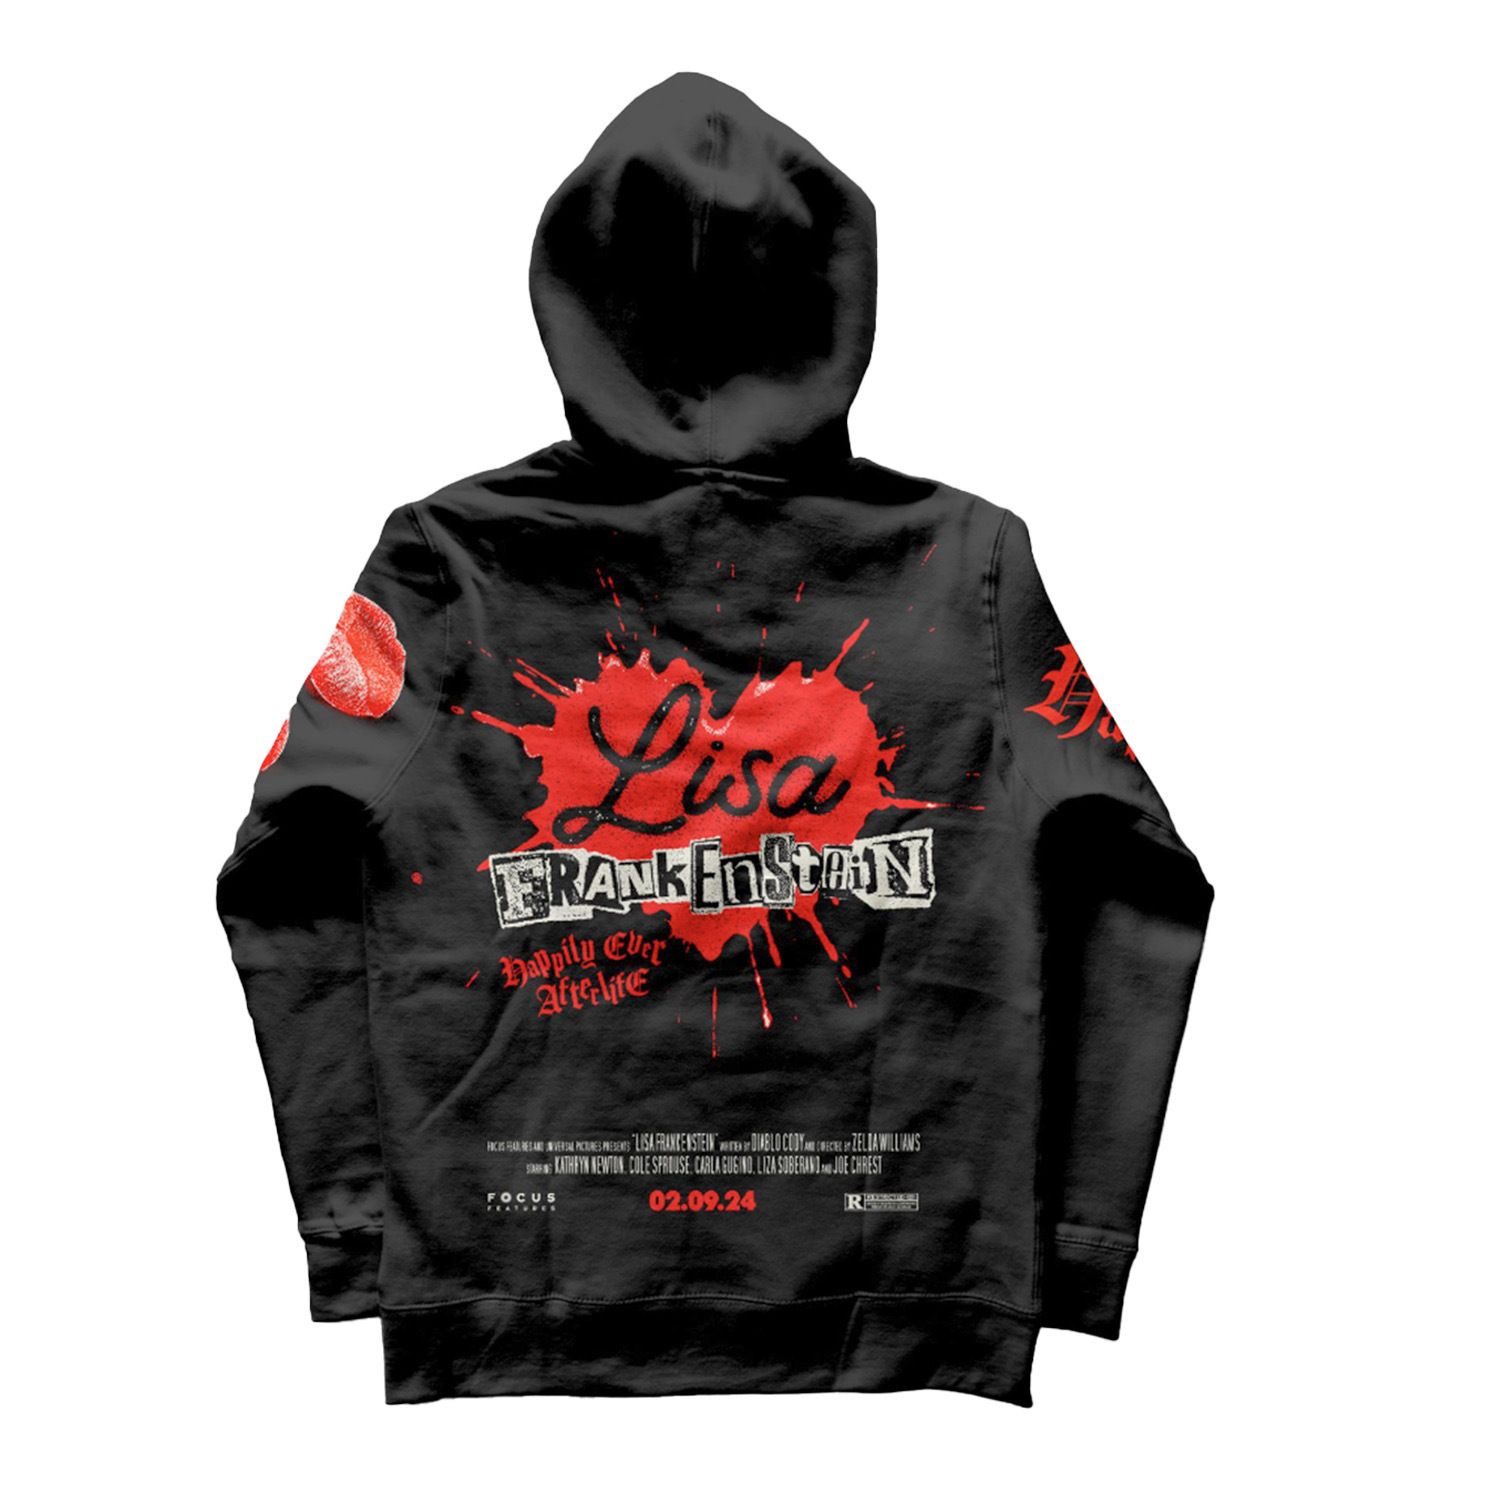 'Lisa Frankenstein' hoodie for our exclusive giveaway